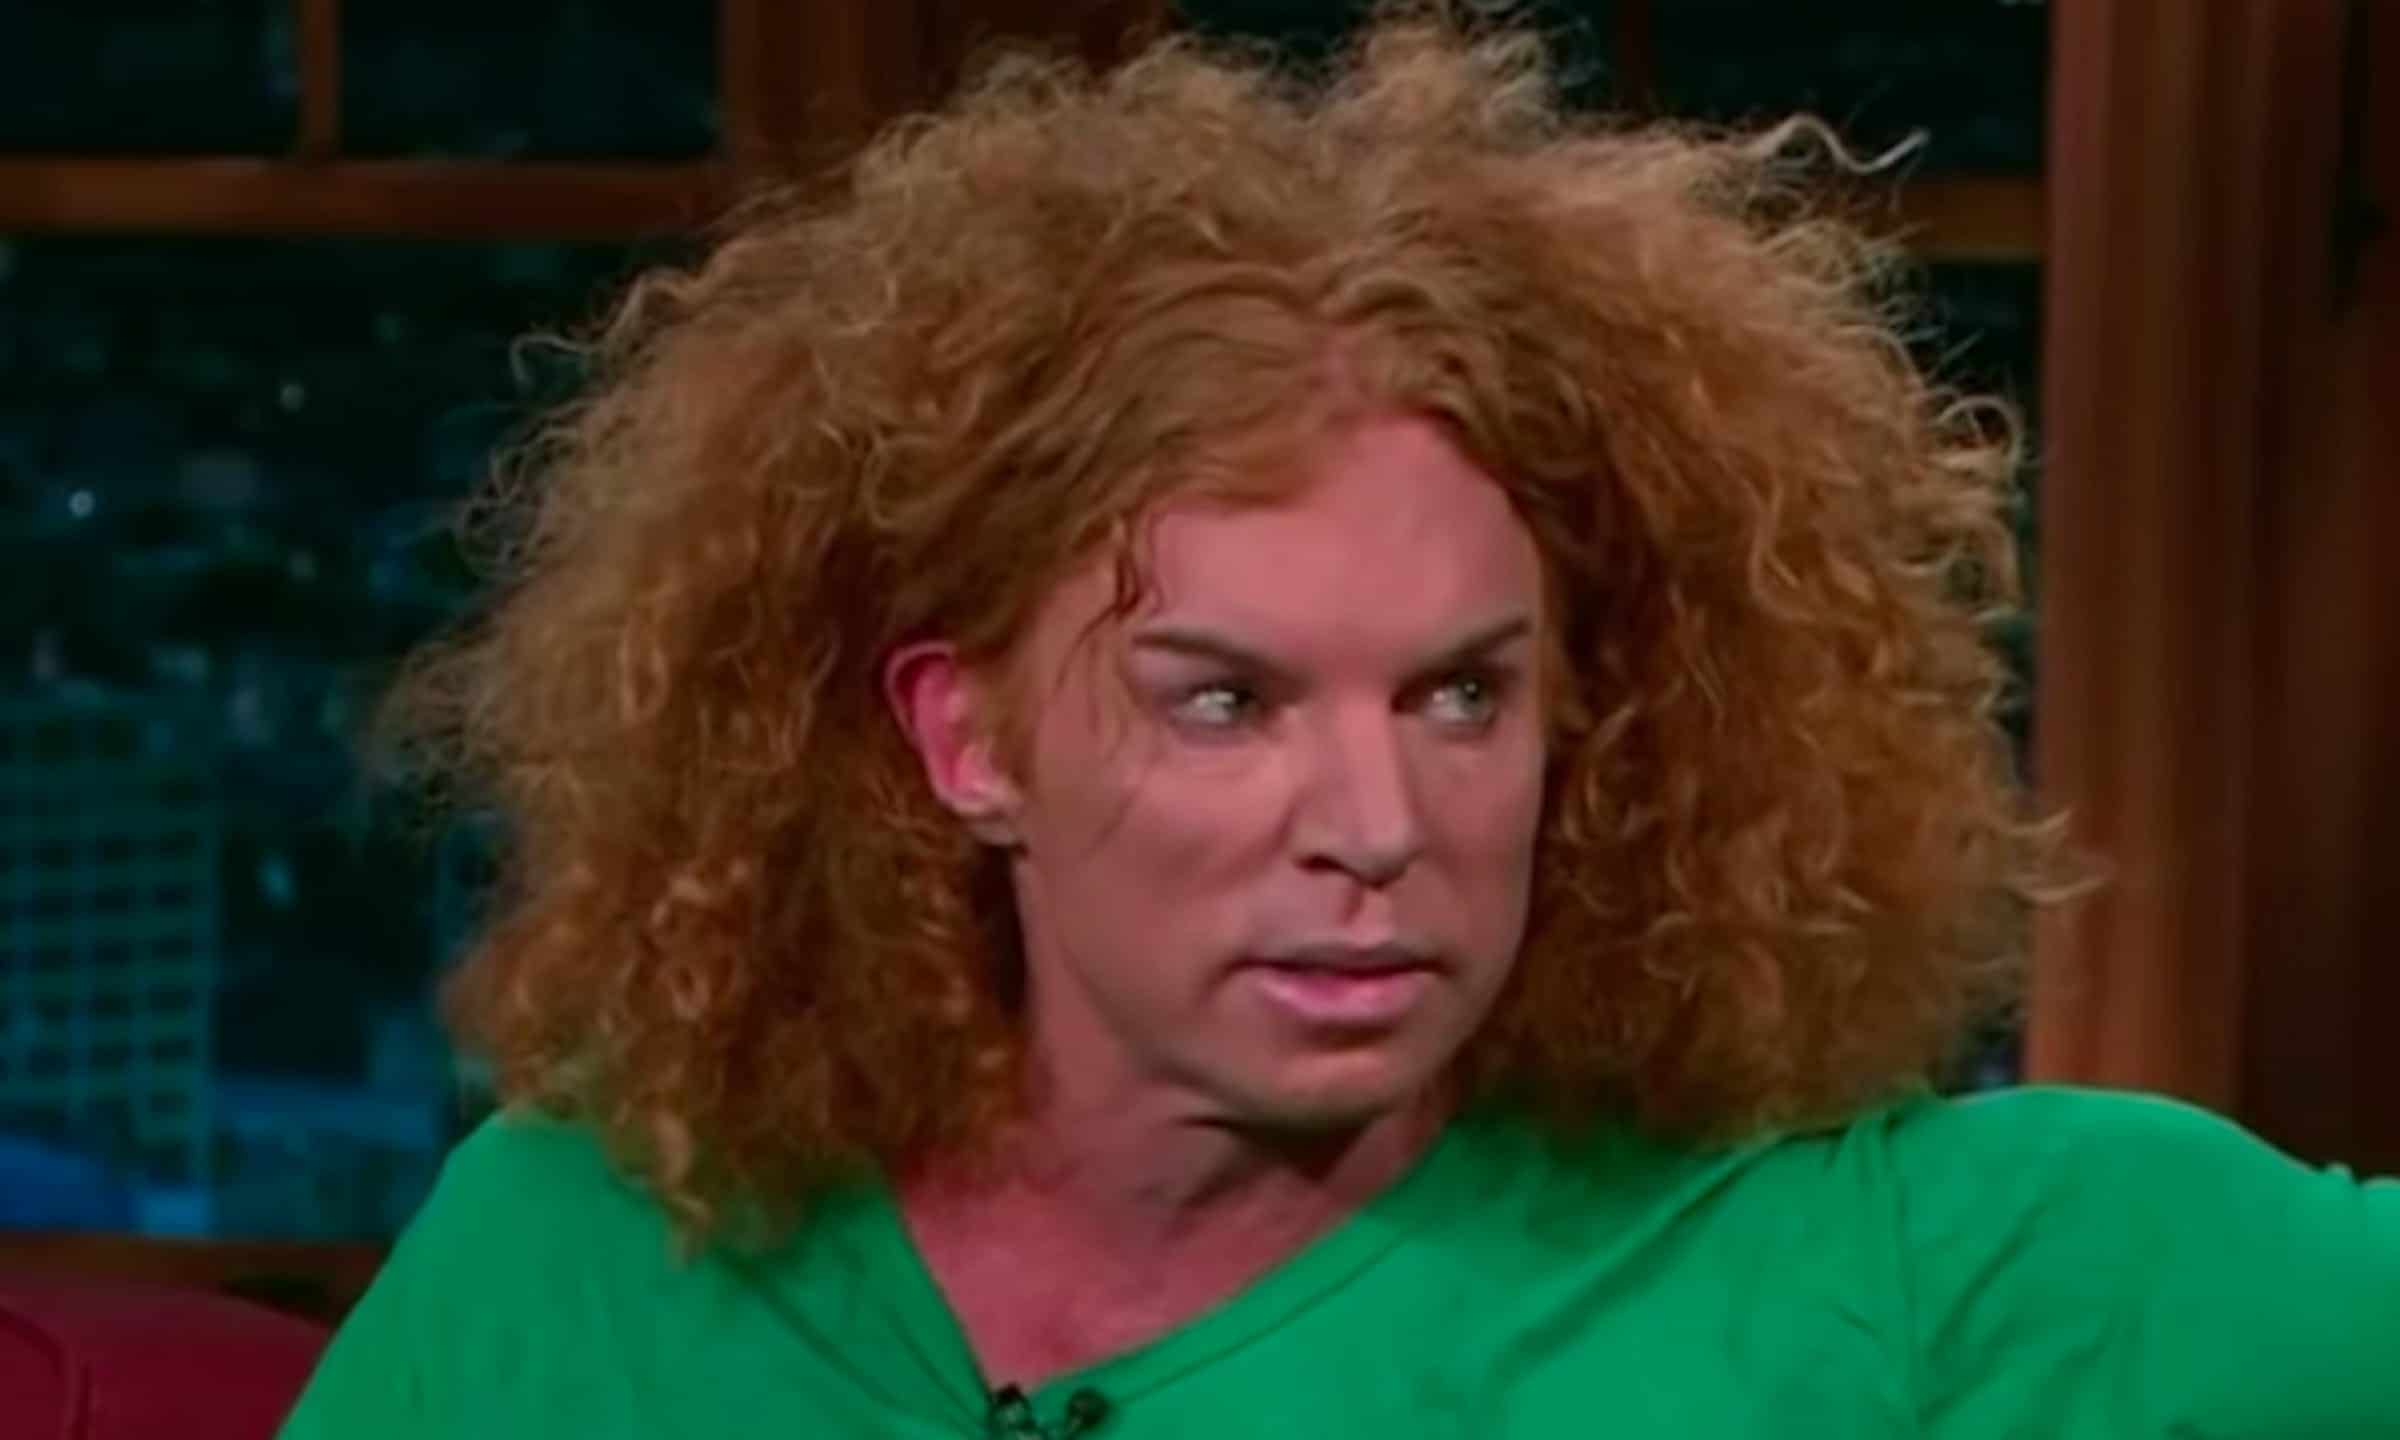 Carrot Top during his early days (Credits: Snakkle)